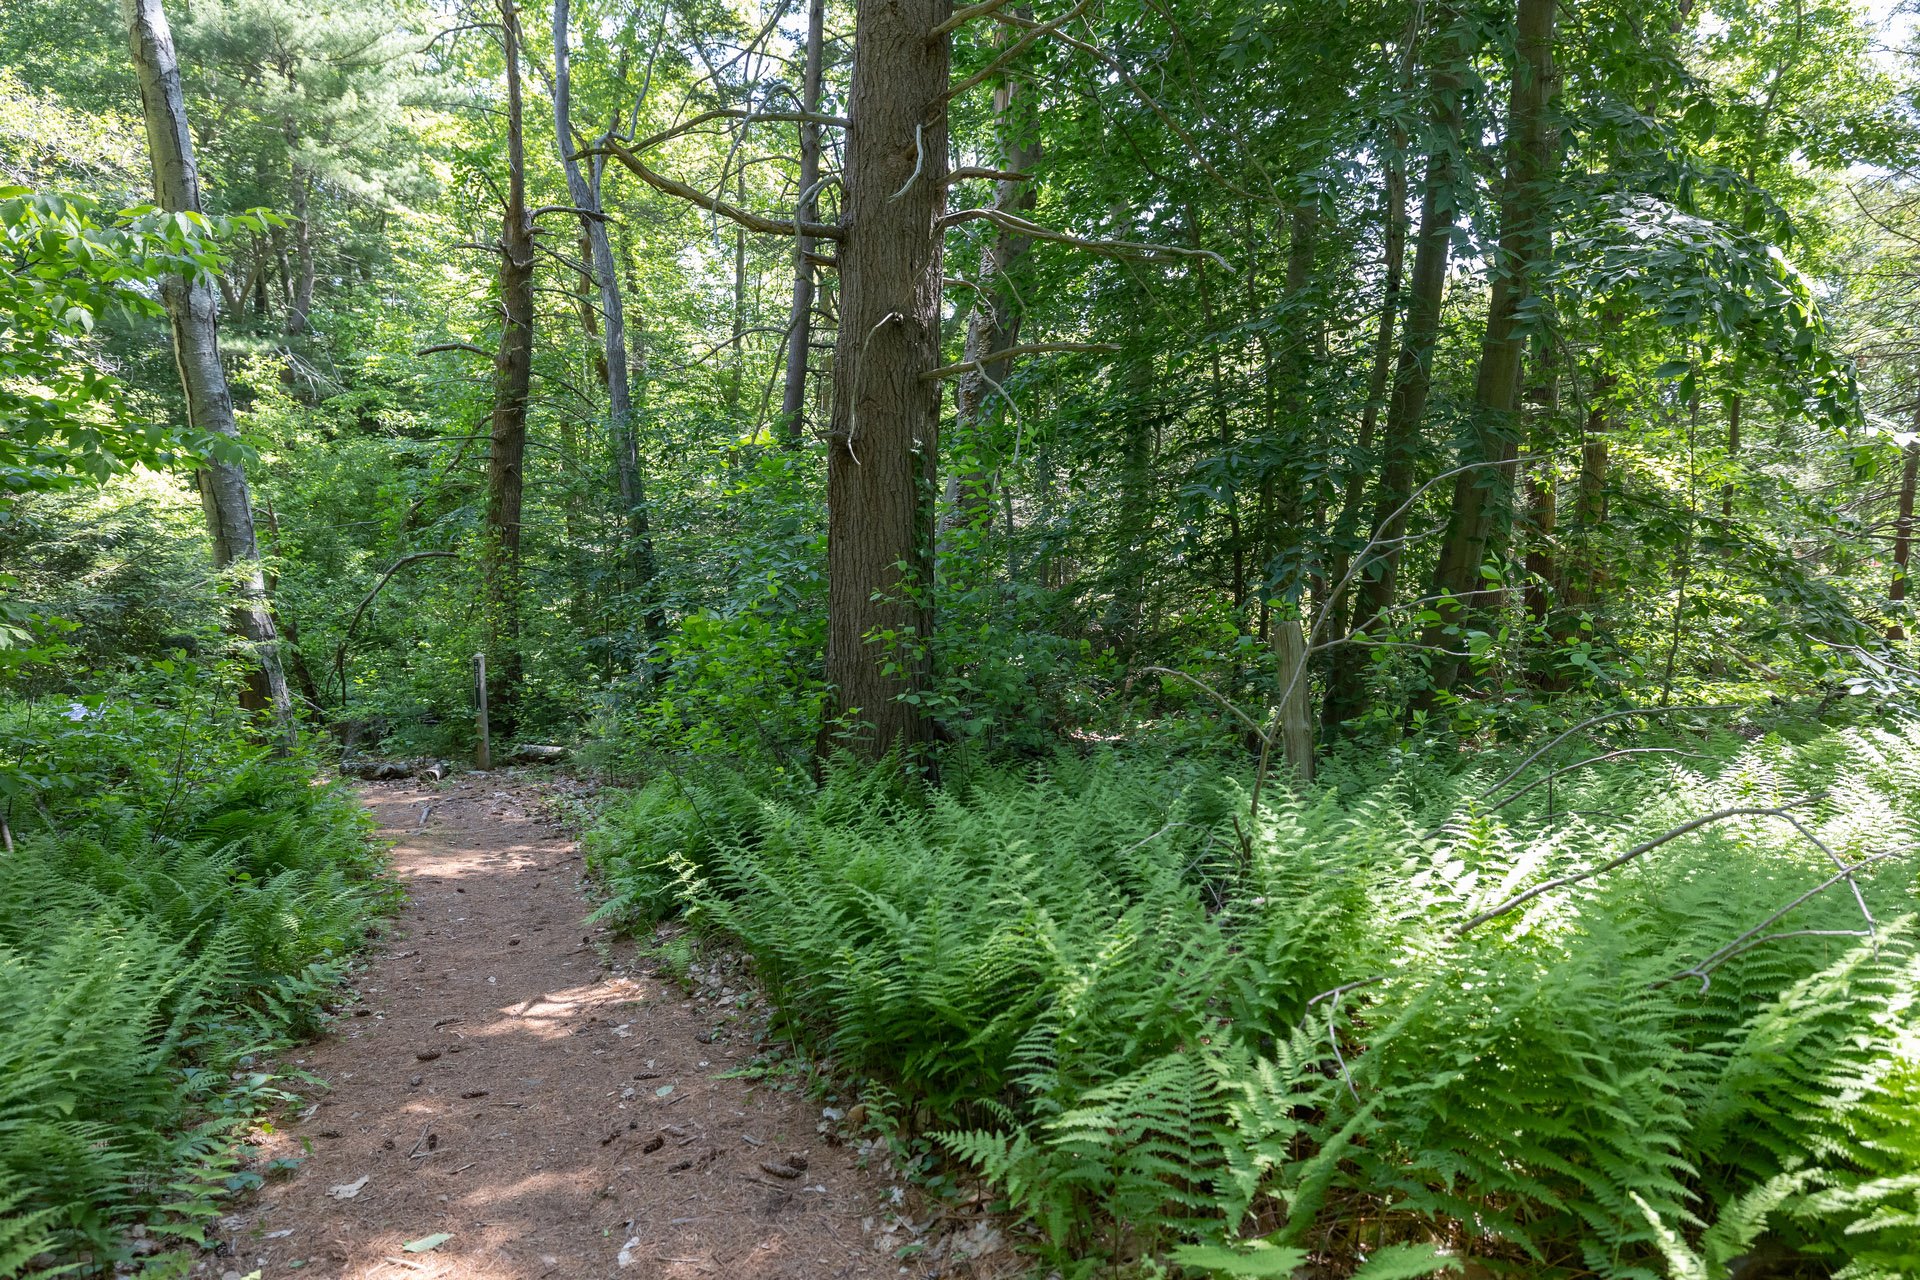 A dirt pathway leasing into a thick, green forest. Both sides of the trail are covered by tall, green ferns.